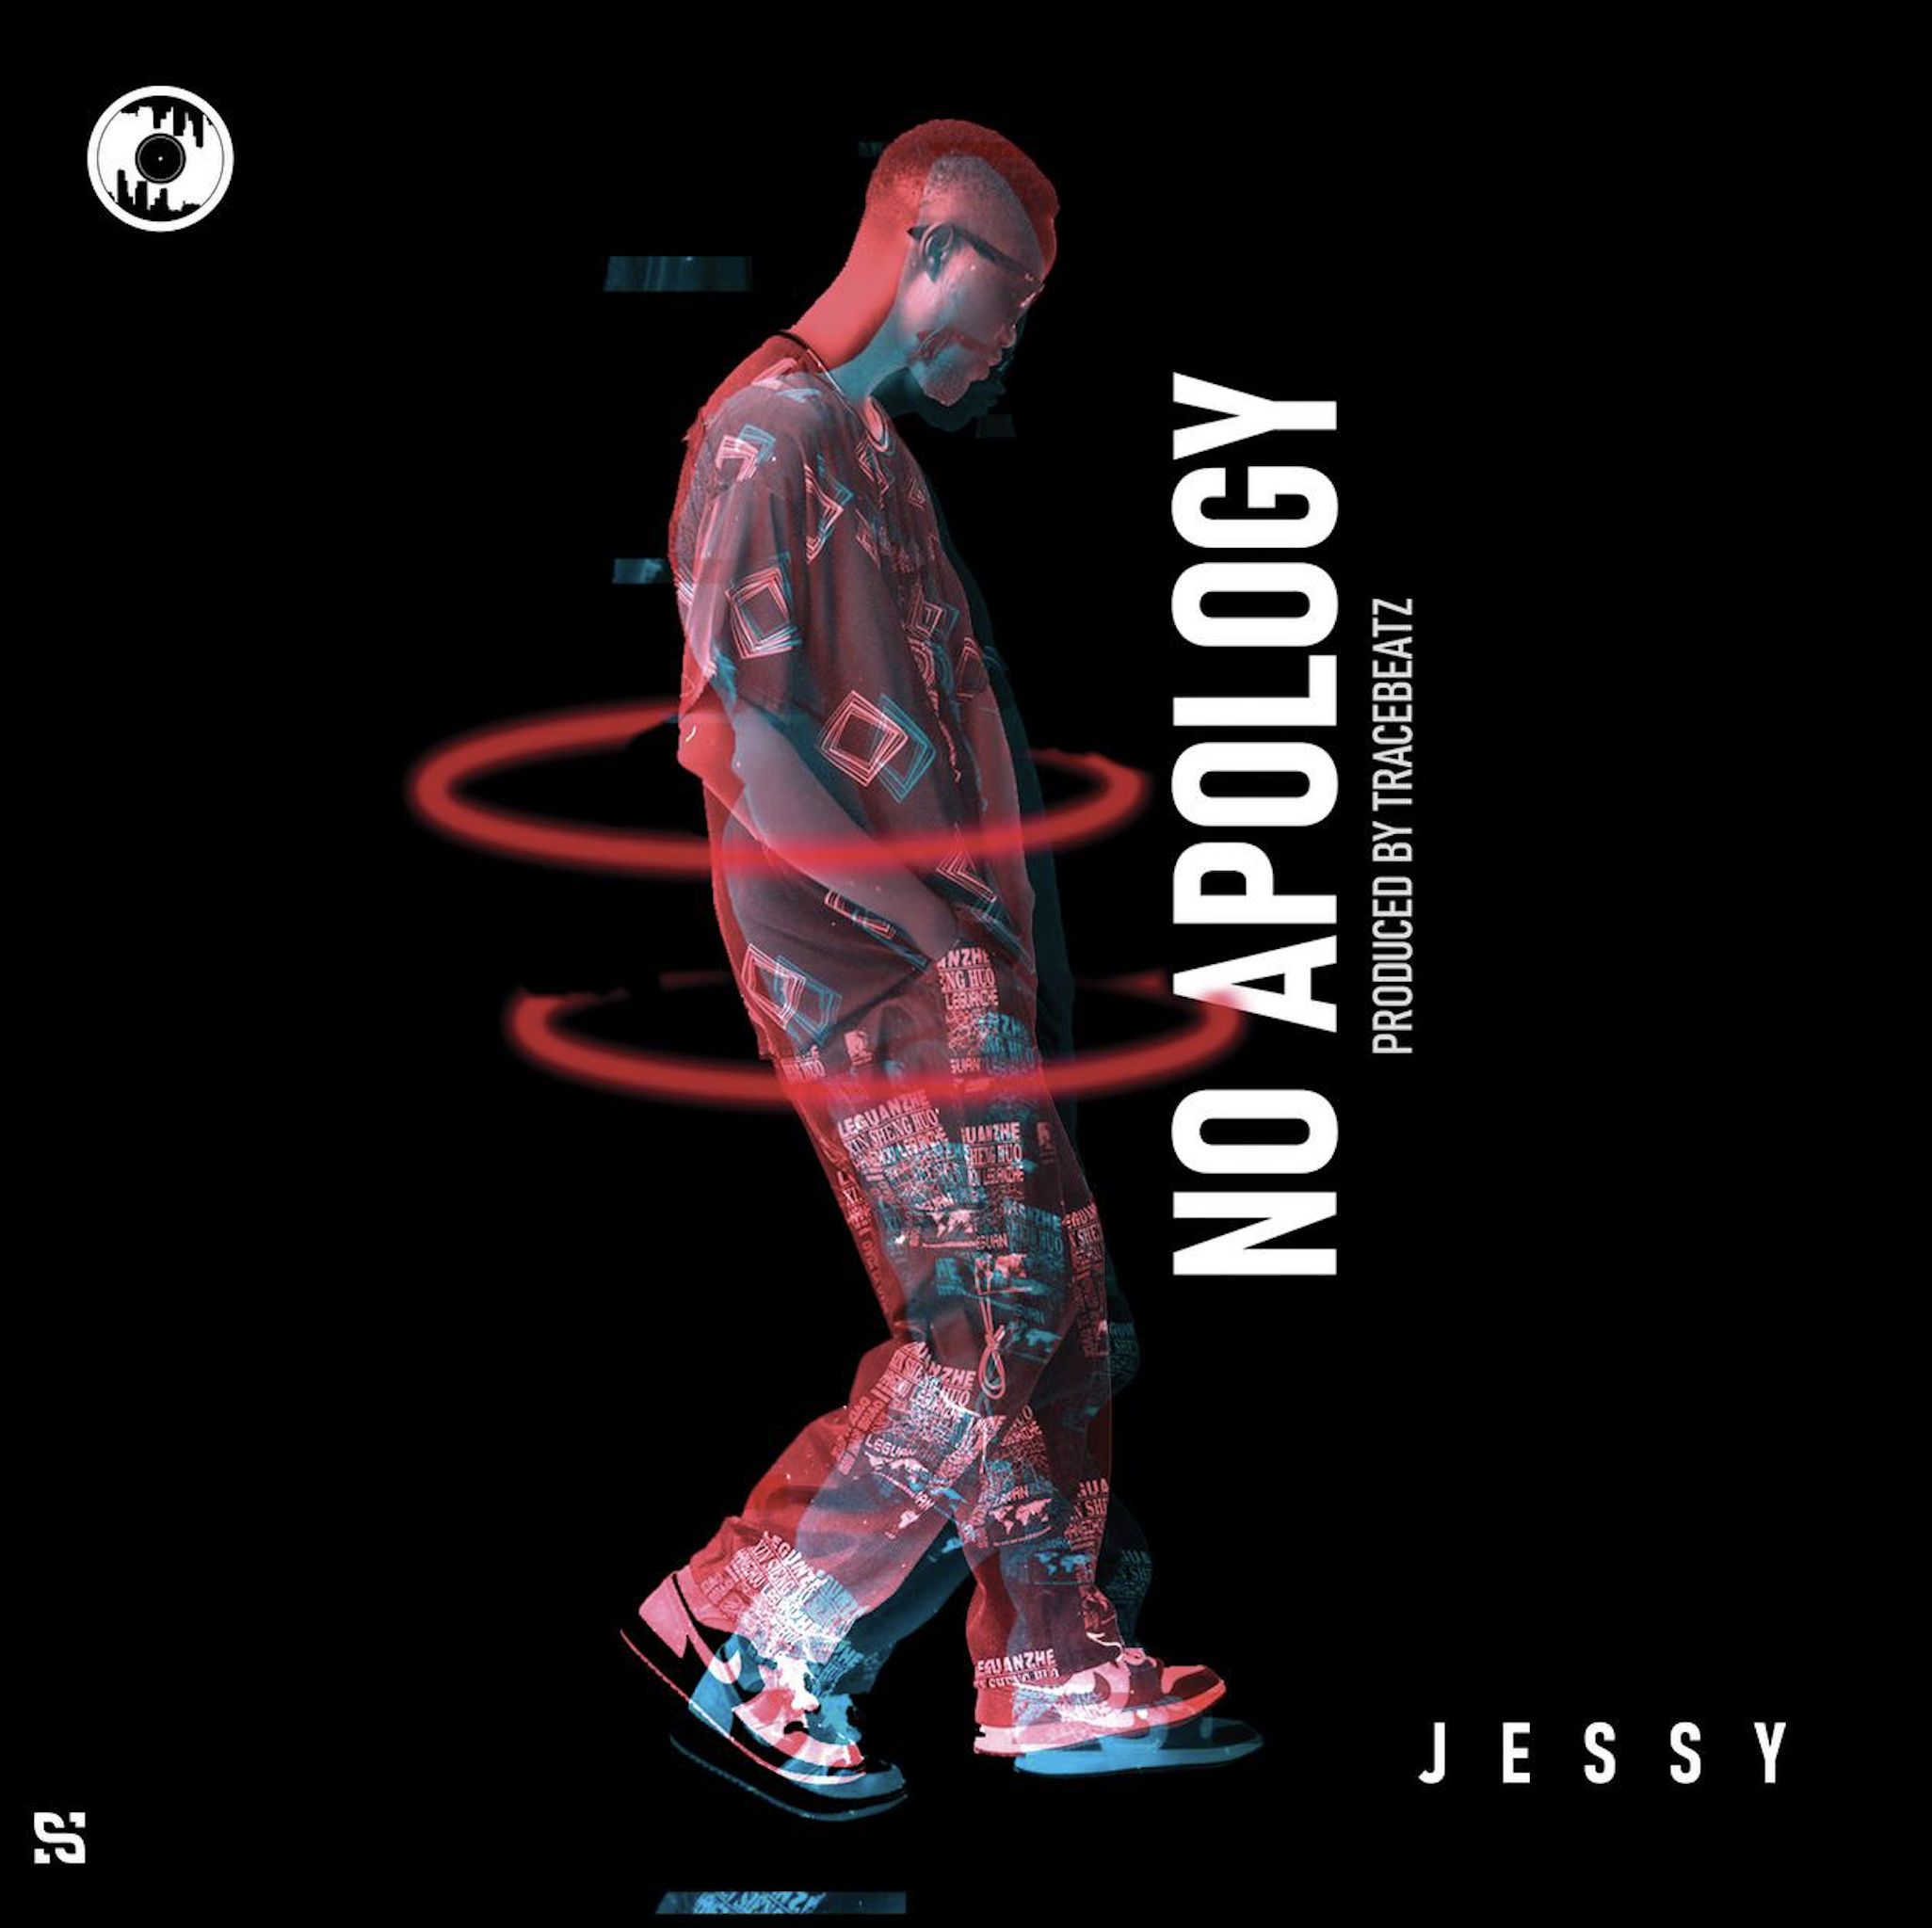 Jessy Gh back with his new studio work "No Apology"